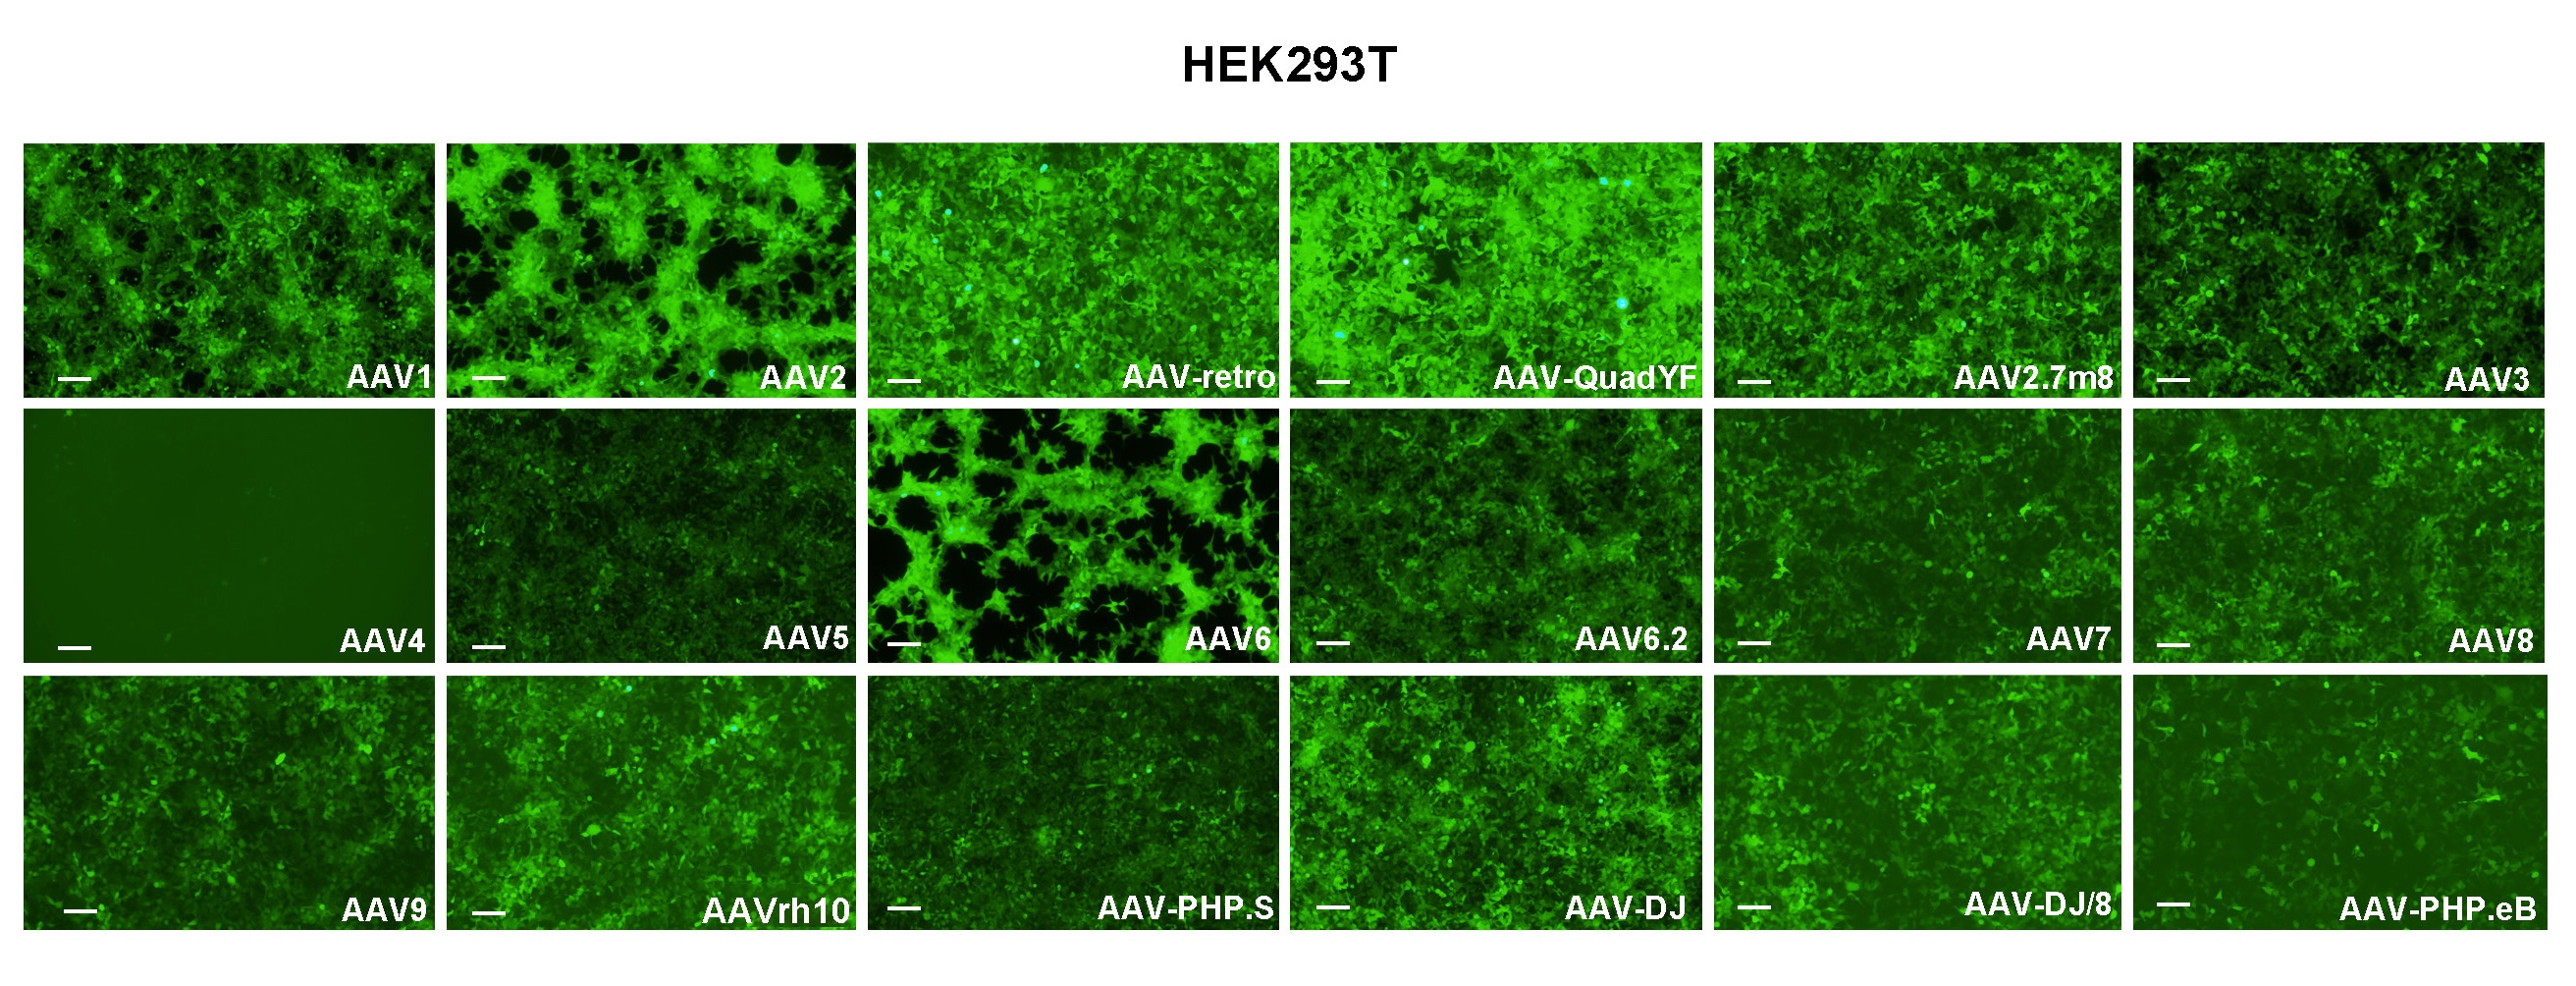 HEK293T cells were transduced with 18 serotypes of recombinant AAVs and presented strong EGFP fluorescent signal.